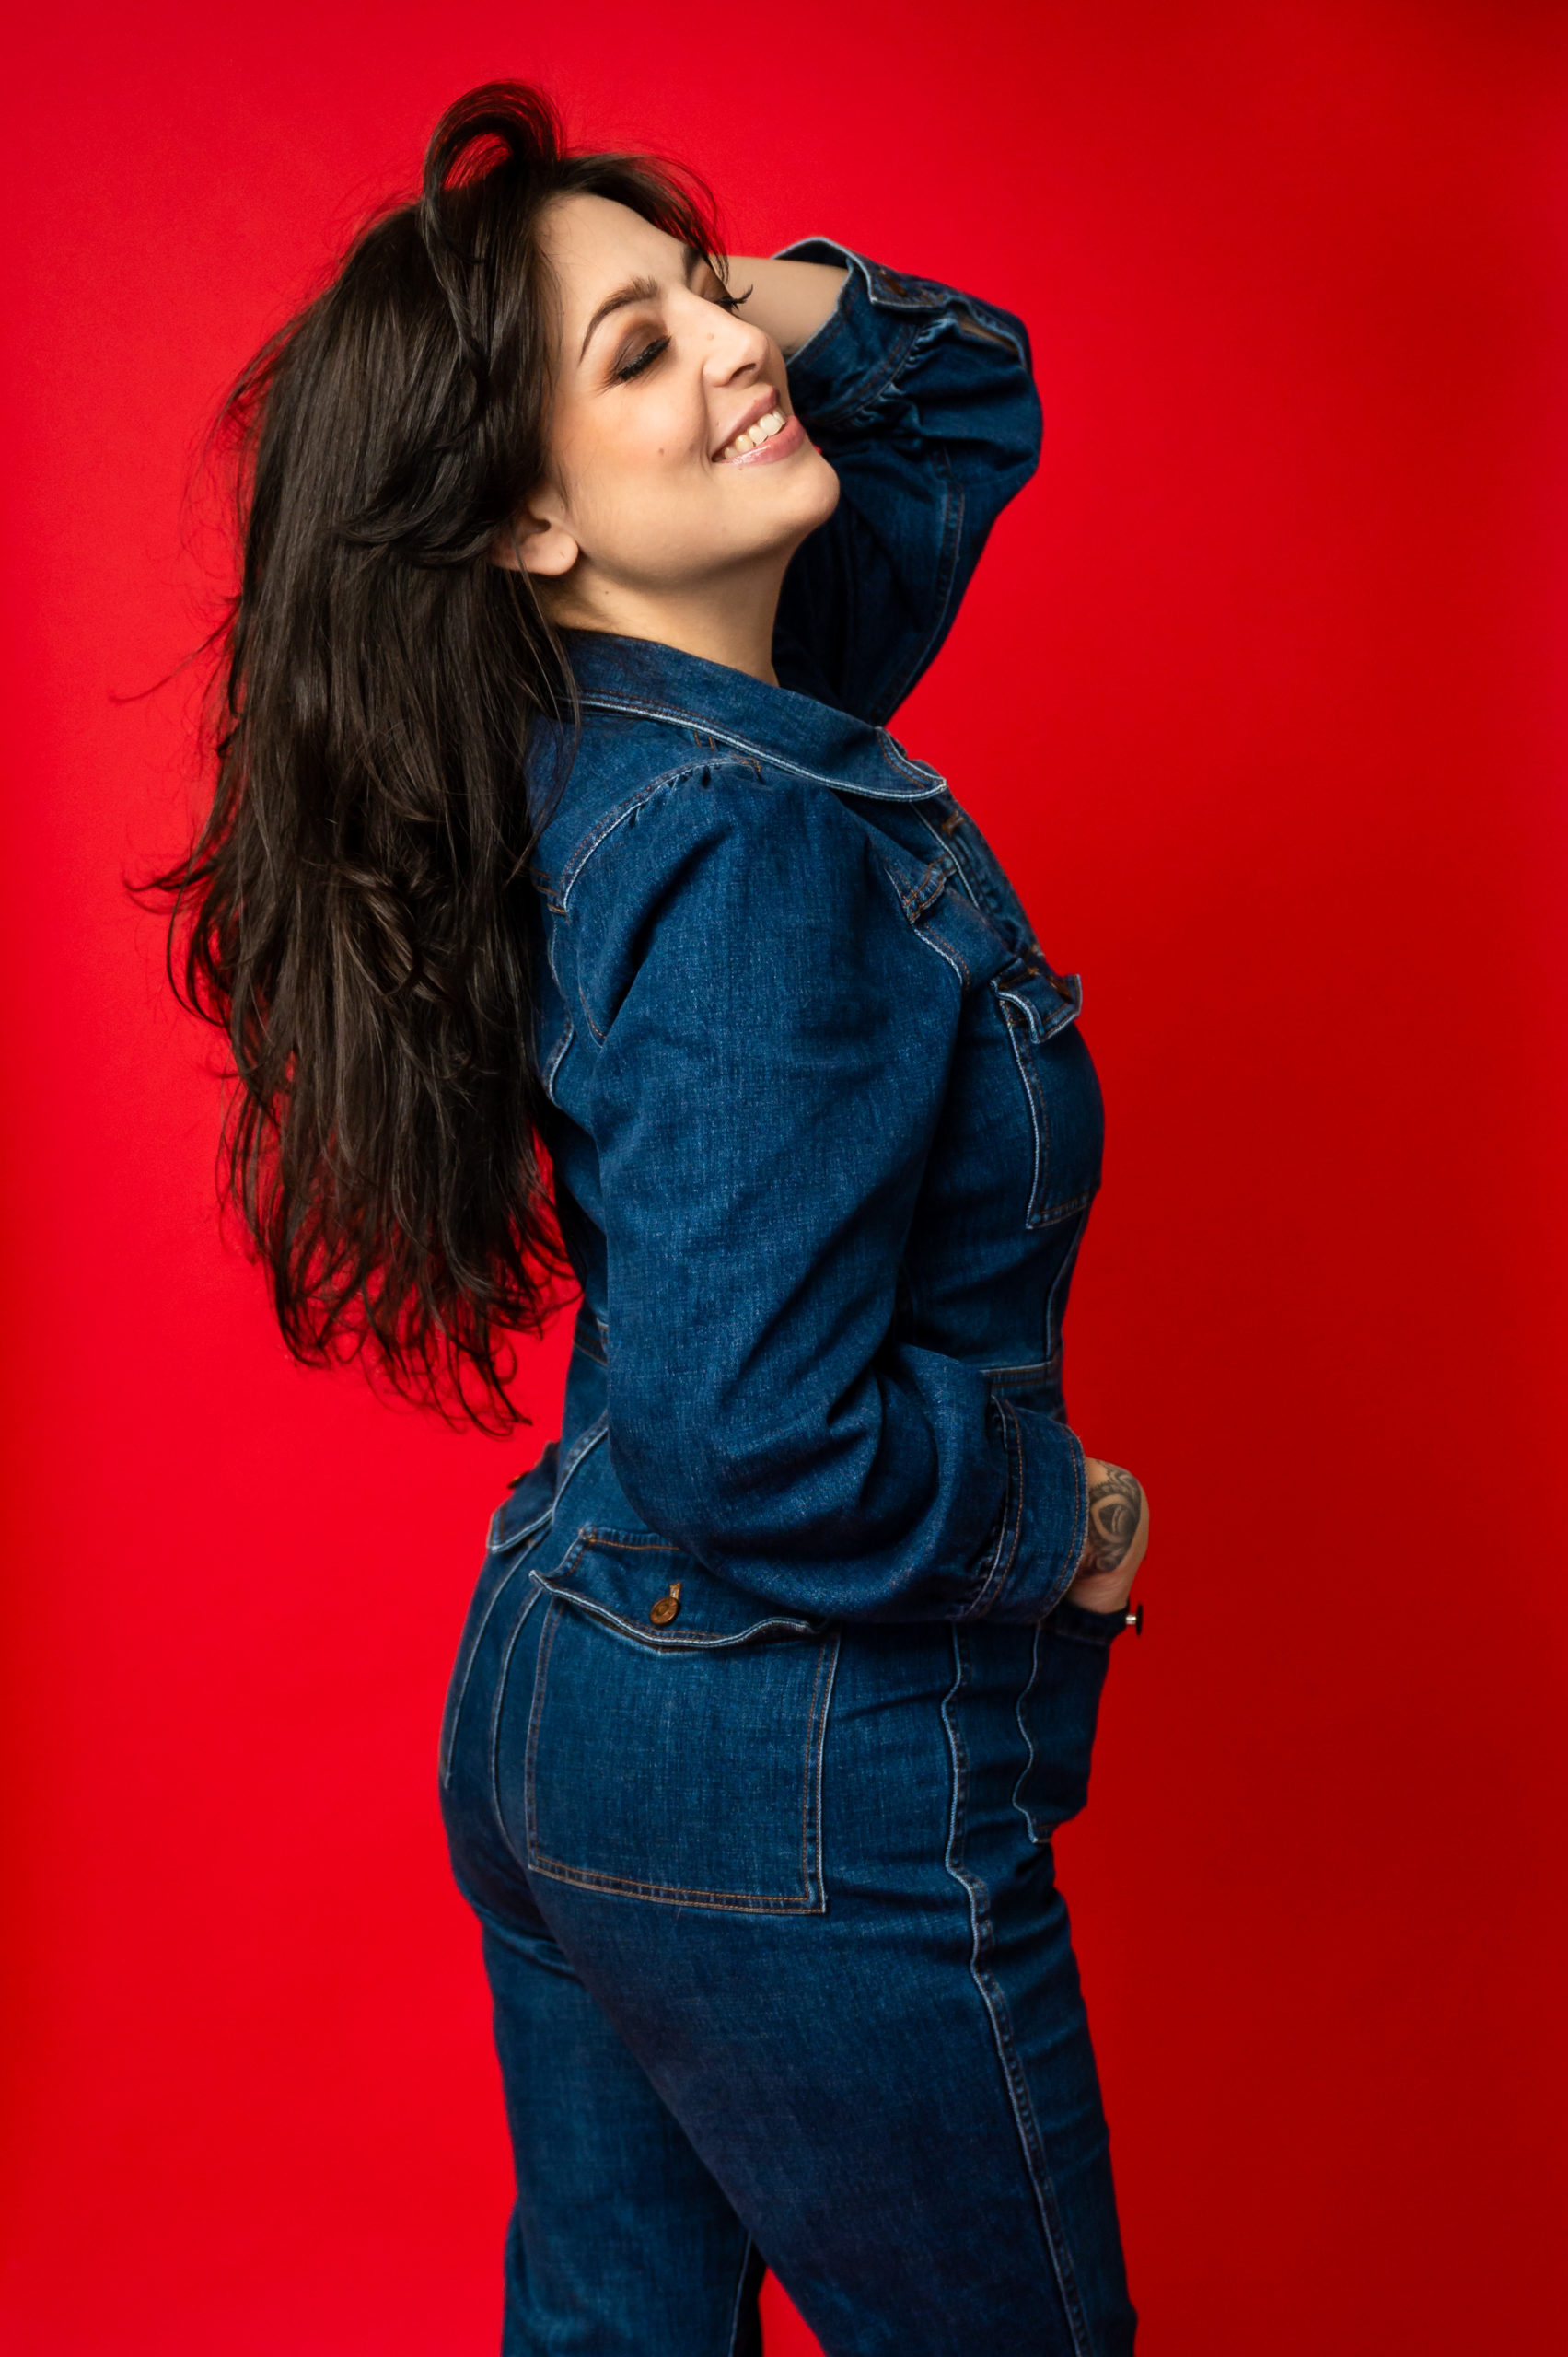 Studio portrait of a woman wearing a jean jumpsuit in front of a red background